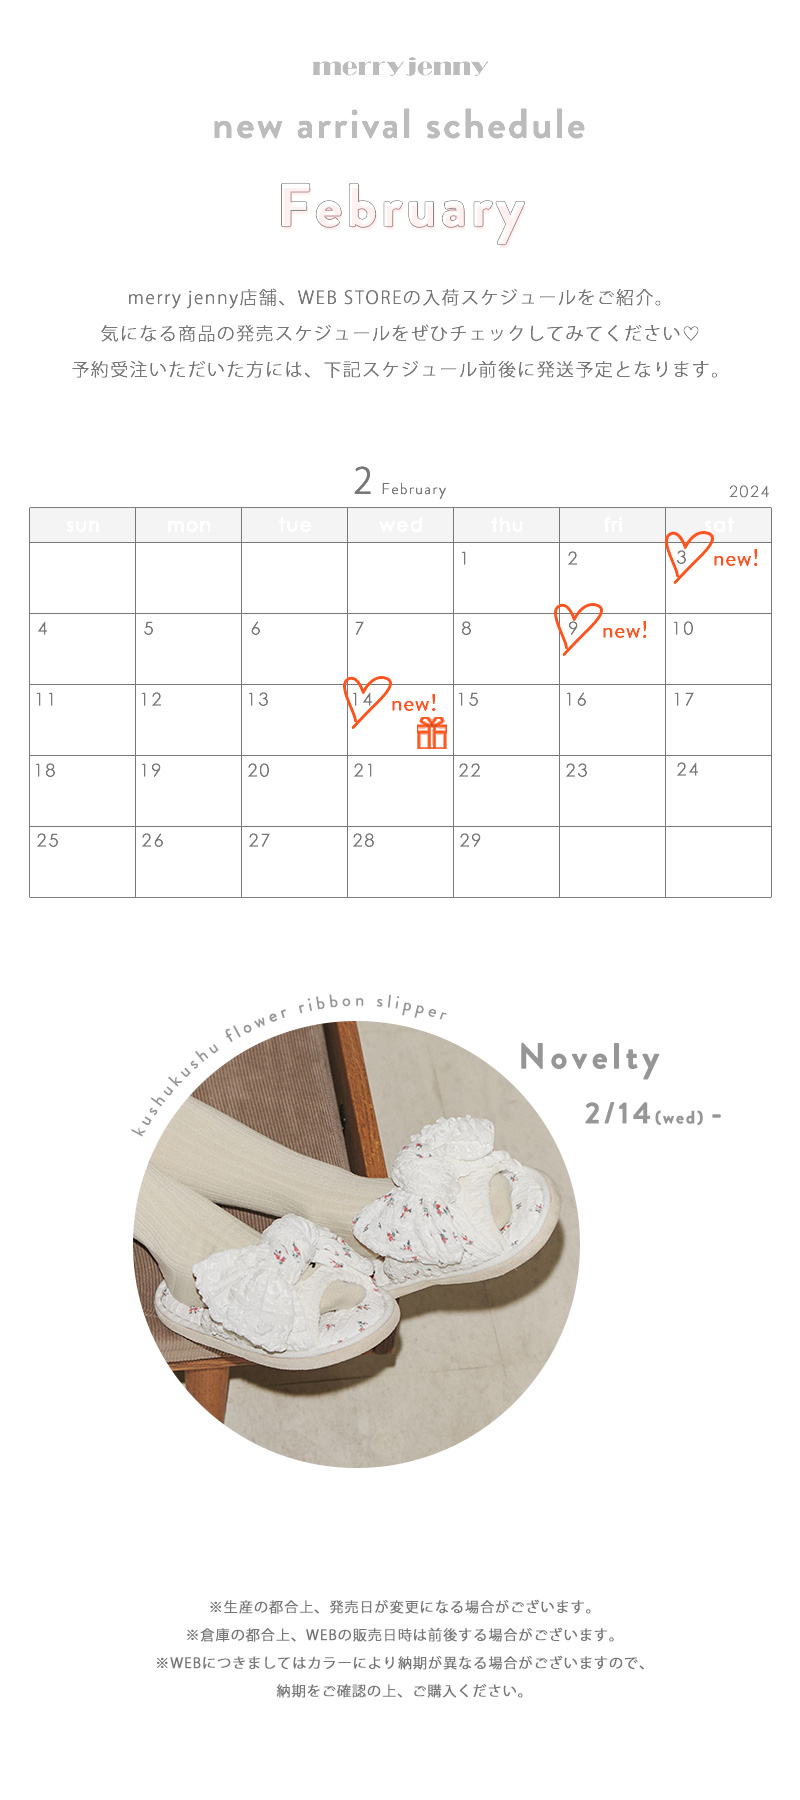 ★February new arrival schedule